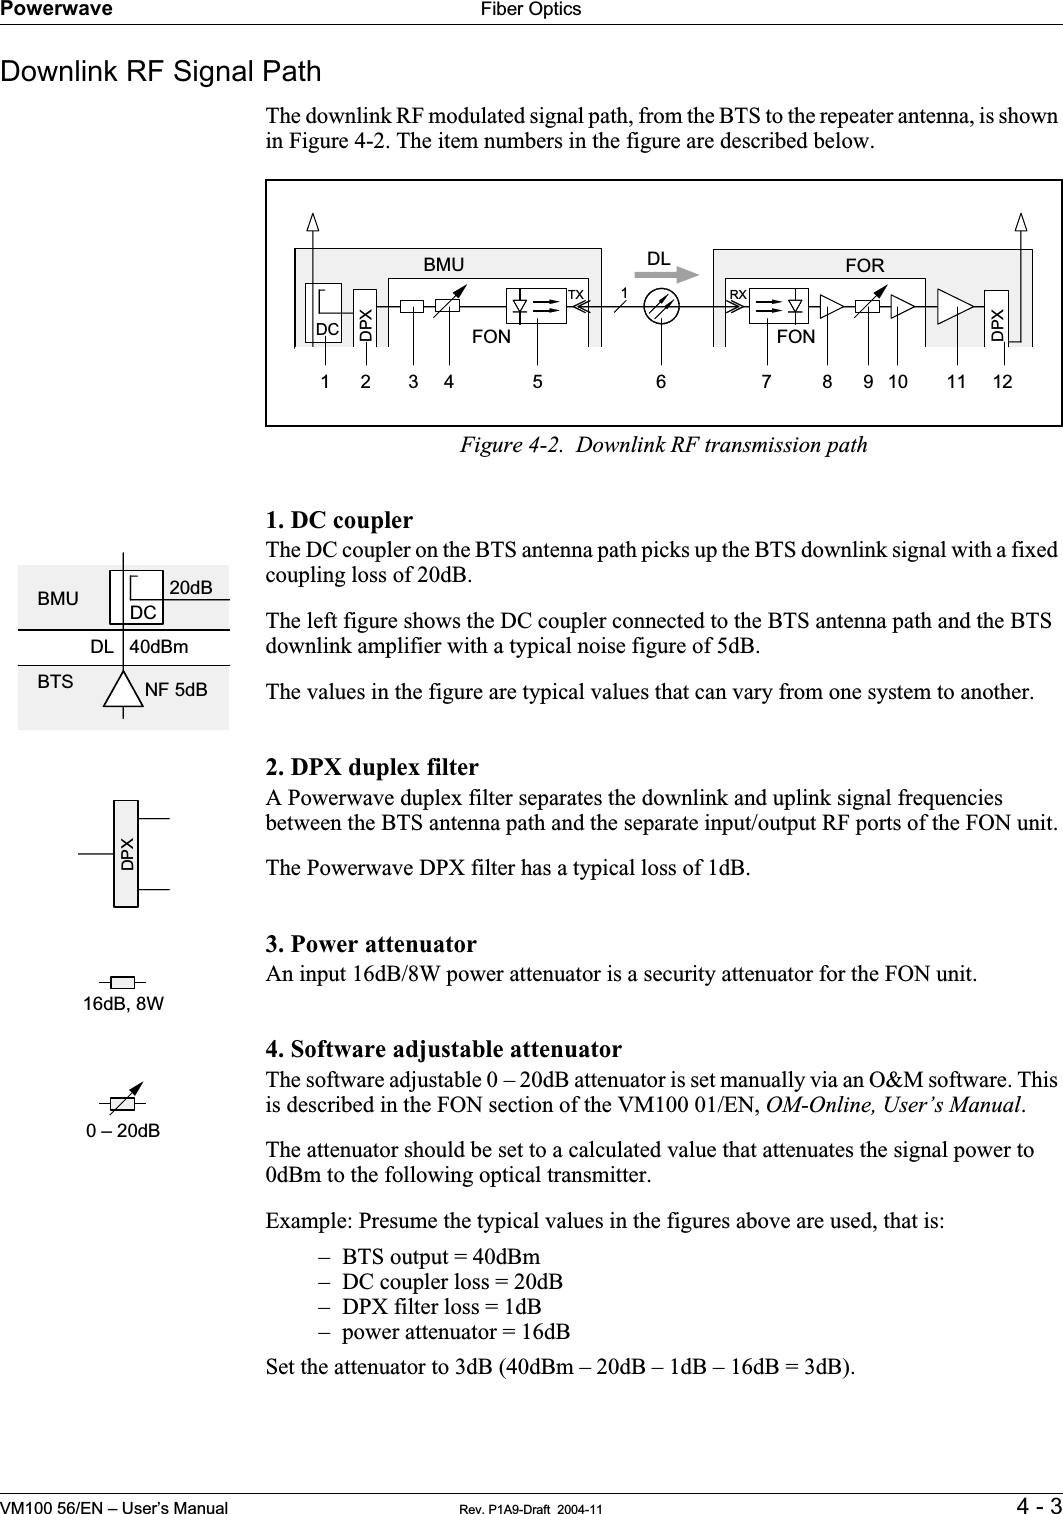 Powerwave Fiber OpticsVM100 56/EN – User’s Manual Rev. P1A9-Draft  2004-11 4 - 3Downlink RF Signal PathThe downlink RF modulated signal path, from the BTS to the repeater antenna, is shown in Figure 4-2. The item numbers in the figure are described below.Figure 4-2.  Downlink RF transmission path1. DC couplerThe DC coupler on the BTS antenna path picks up the BTS downlink signal with a fixed coupling loss of 20dB.The left figure shows the DC coupler connected to the BTS antenna path and the BTS downlink amplifier with a typical noise figure of 5dB.The values in the figure are typical values that can vary from one system to another.2. DPX duplex filterA Powerwave duplex filter separates the downlink and uplink signal frequencies between the BTS antenna path and the separate input/output RF ports of the FON unit.The Powerwave DPX filter has a typical loss of 1dB.3. Power attenuatorAn input 16dB/8W power attenuator is a security attenuator for the FON unit.4. Software adjustable attenuatorThe software adjustable 0 – 20dB attenuator is set manually via an O&amp;M software. This is described in the FON section of the VM100 01/EN, OM-Online, User’s Manual.The attenuator should be set to a calculated value that attenuates the signal power to 0dBm to the following optical transmitter.Example: Presume the typical values in the figures above are used, that is:– BTS output = 40dBm– DC coupler loss = 20dB– DPX filter loss = 1dB– power attenuator = 16dBSet the attenuator to 3dB (40dBm – 20dB – 1dB – 16dB = 3dB).BMU FORDC1TX RX2 3 4 5 6 7 8 9 10 11 121FONFONDLDPXDPXNF 5dB40dBm20dBBTSBMUDLDCDPX 16dB, 8W   0 – 20dB